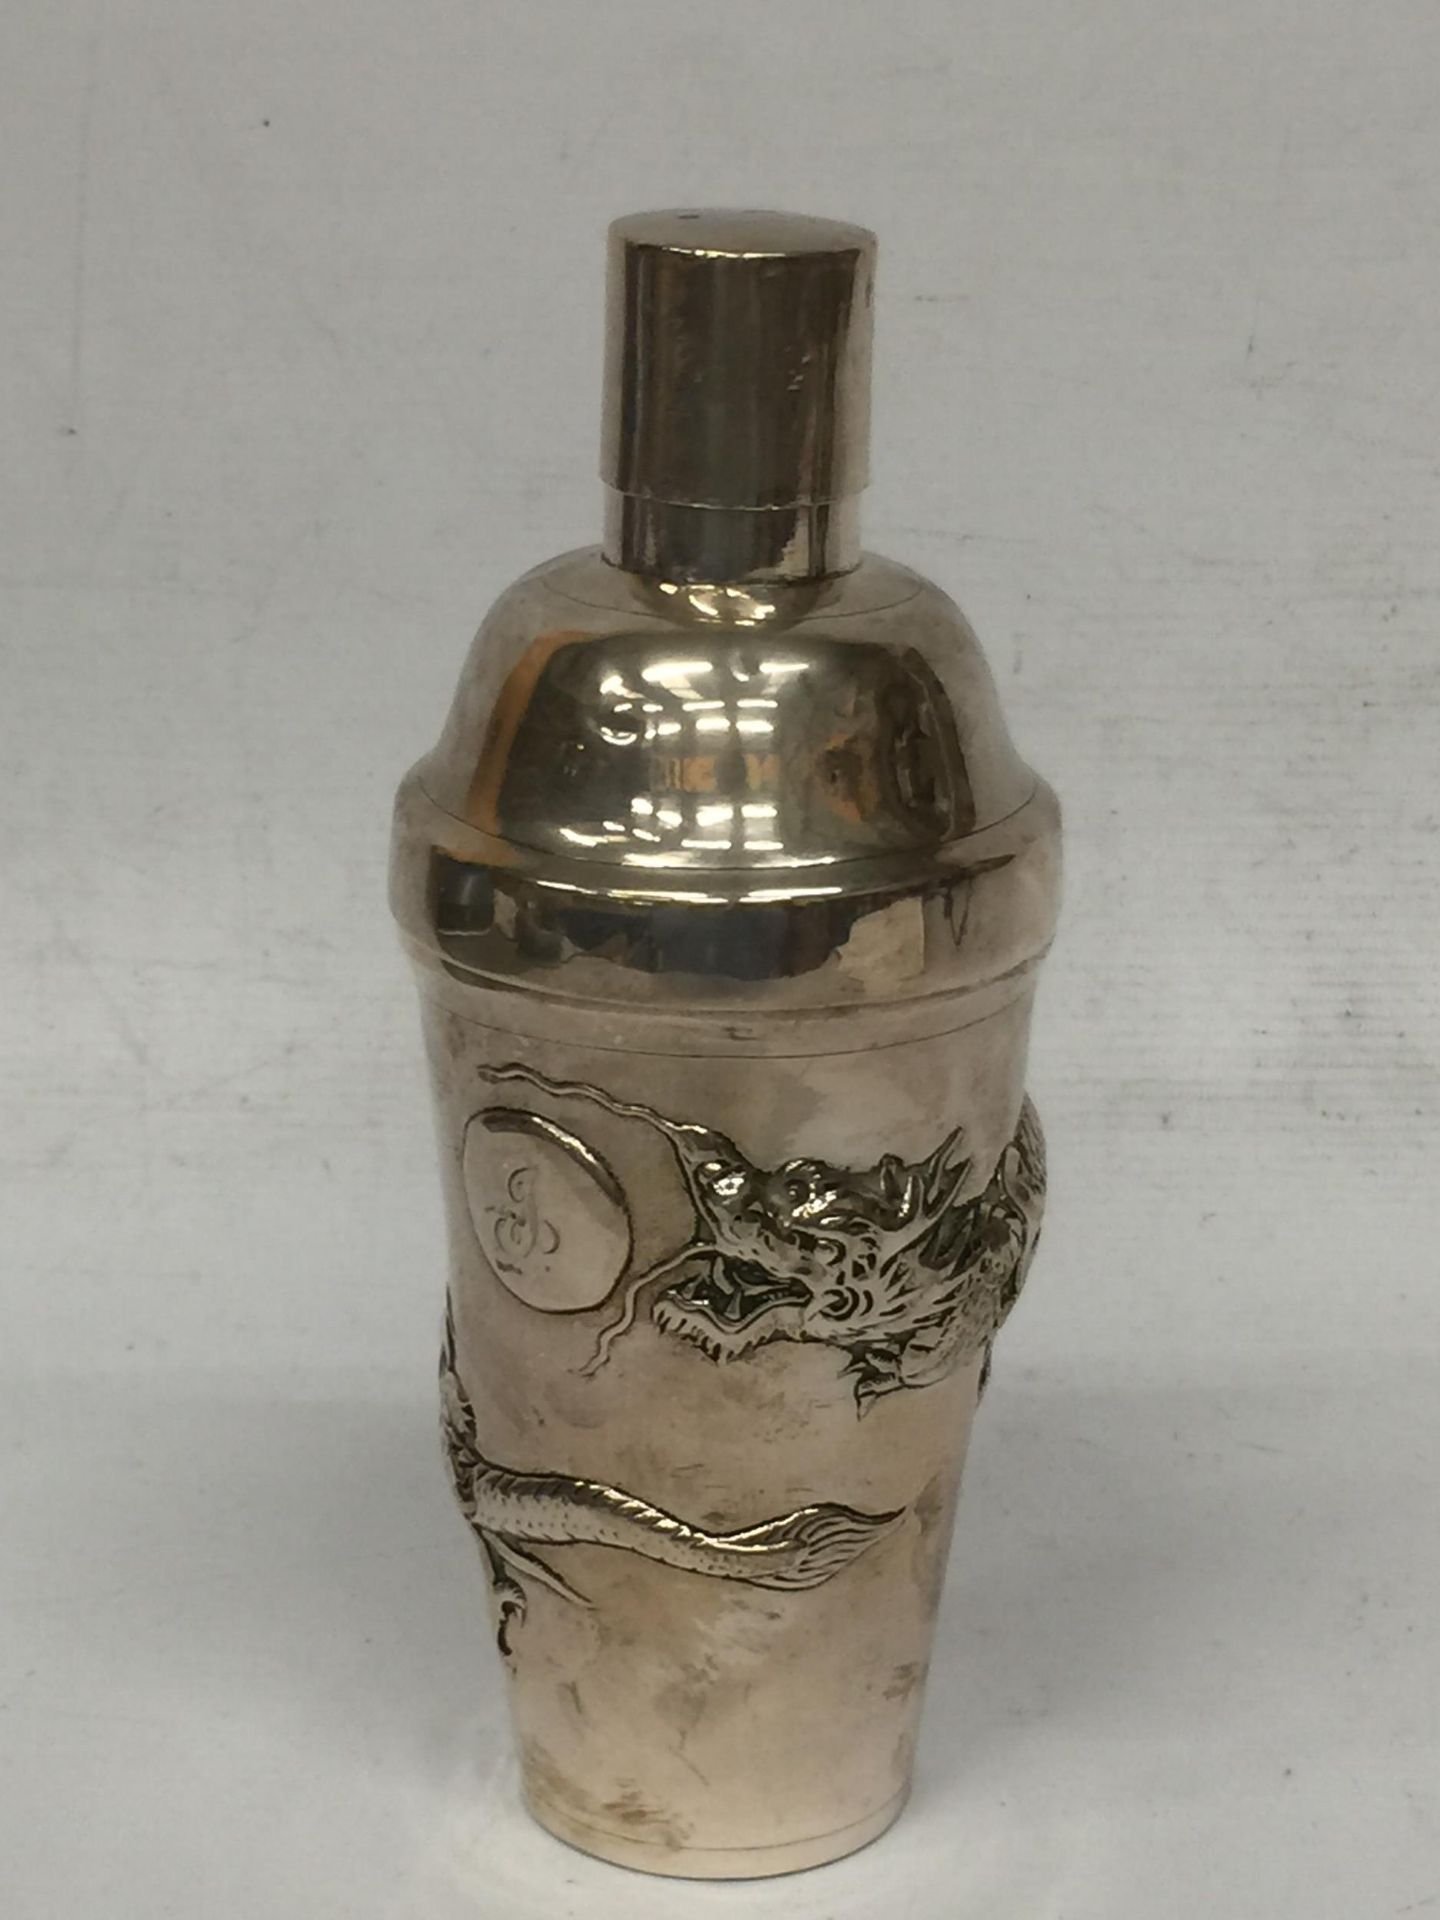 A BELIEVED SILVER CHINESE NANKING COCKTAIL SHAKER WITH DRAGON APPLIED DESIGN